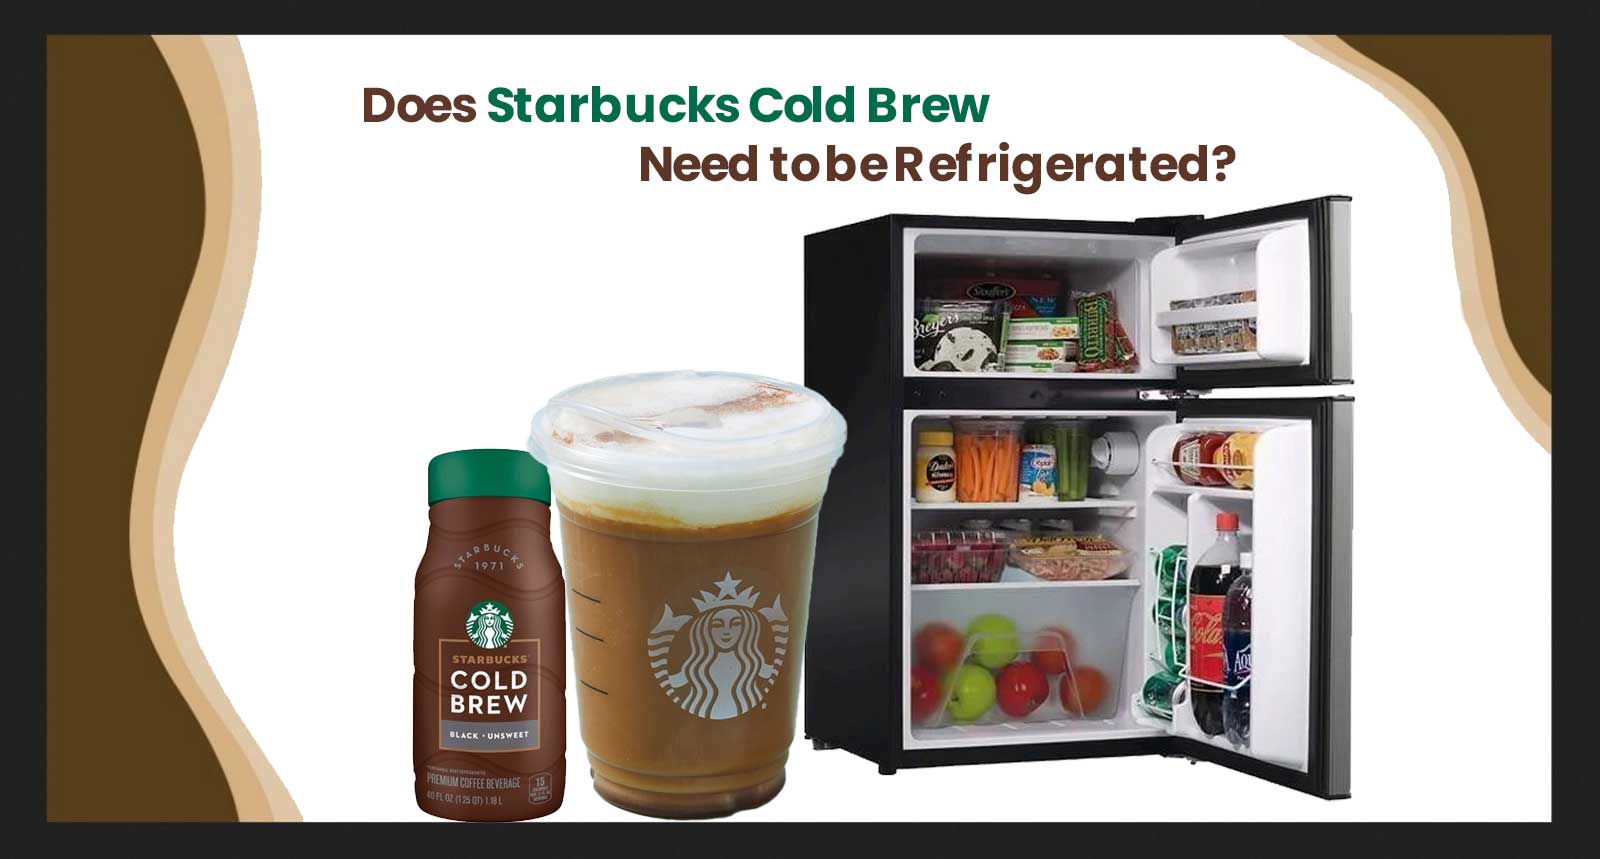 Does Starbucks Cold Brew Need to be Refrigerated